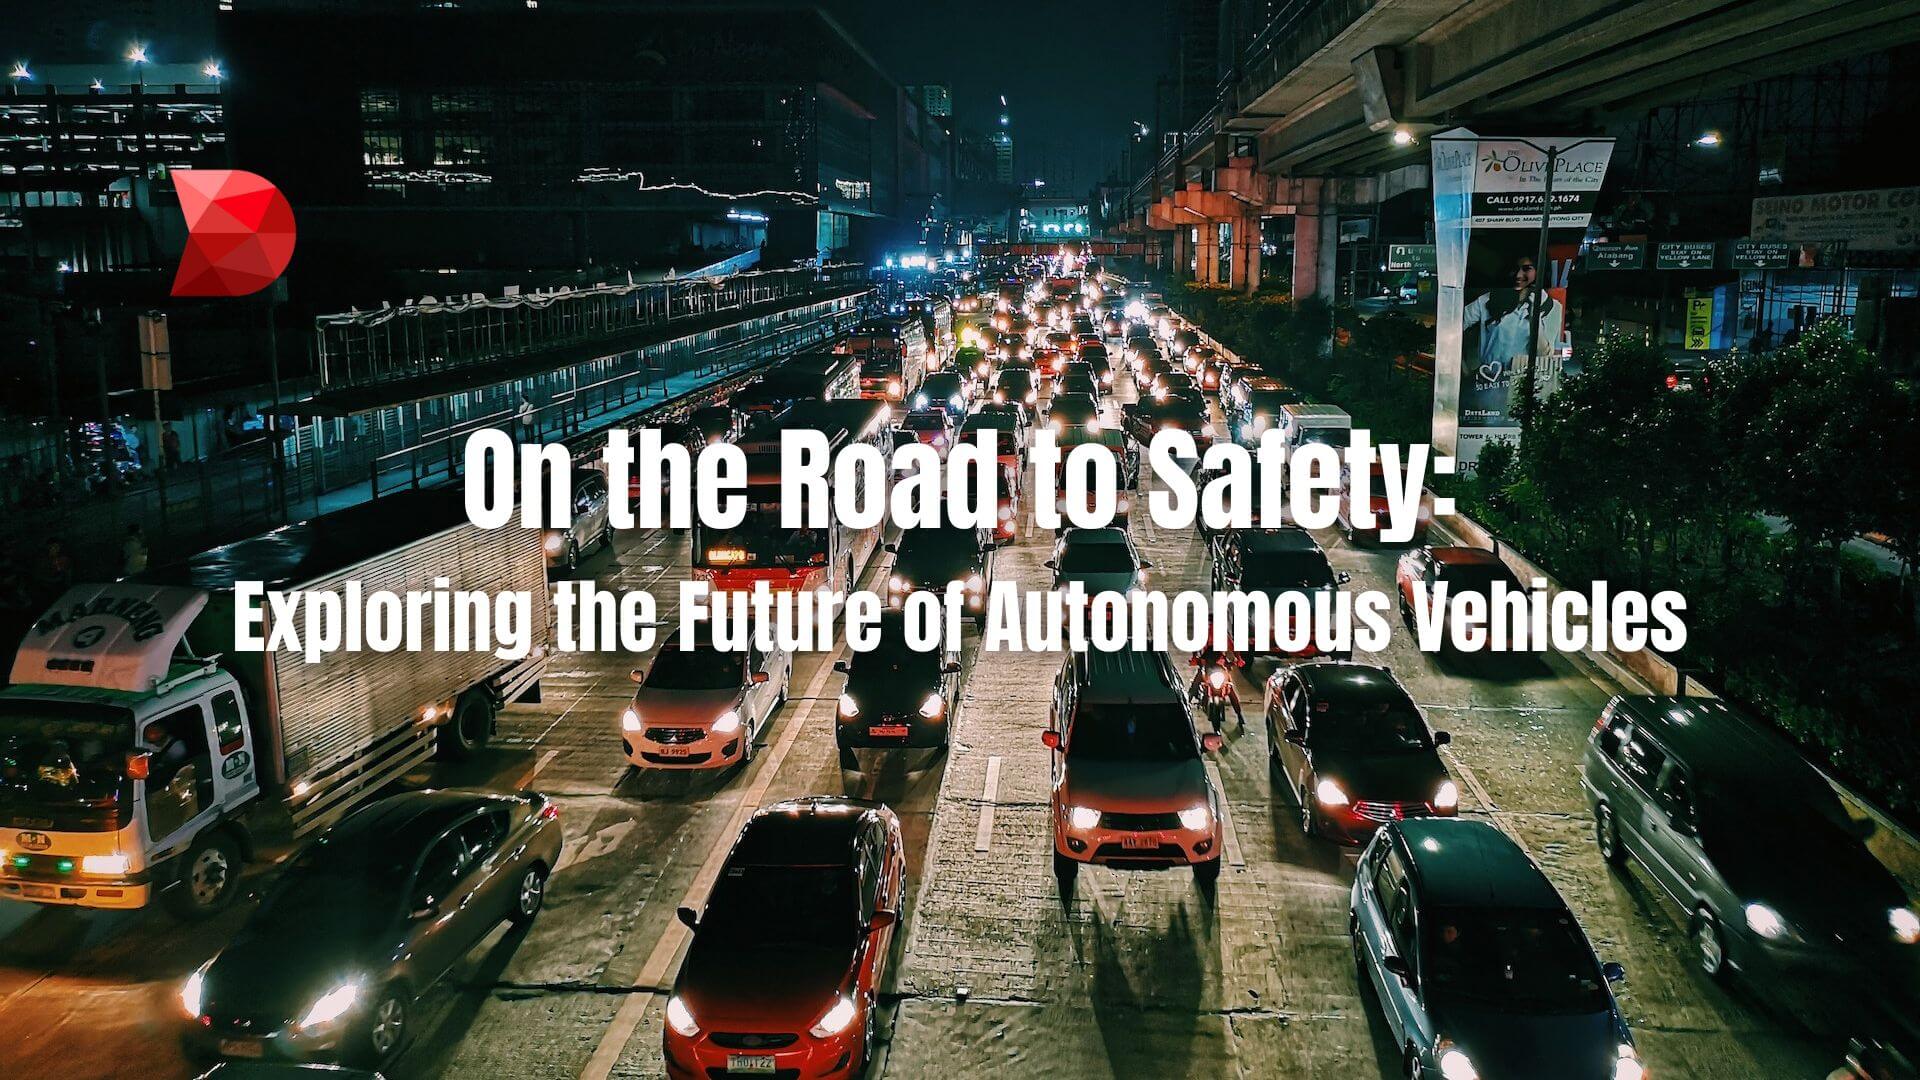 Autonomous vehicles have been viewed as both a technological advancement and an ethical and safety dilemma. Explore its current state now!